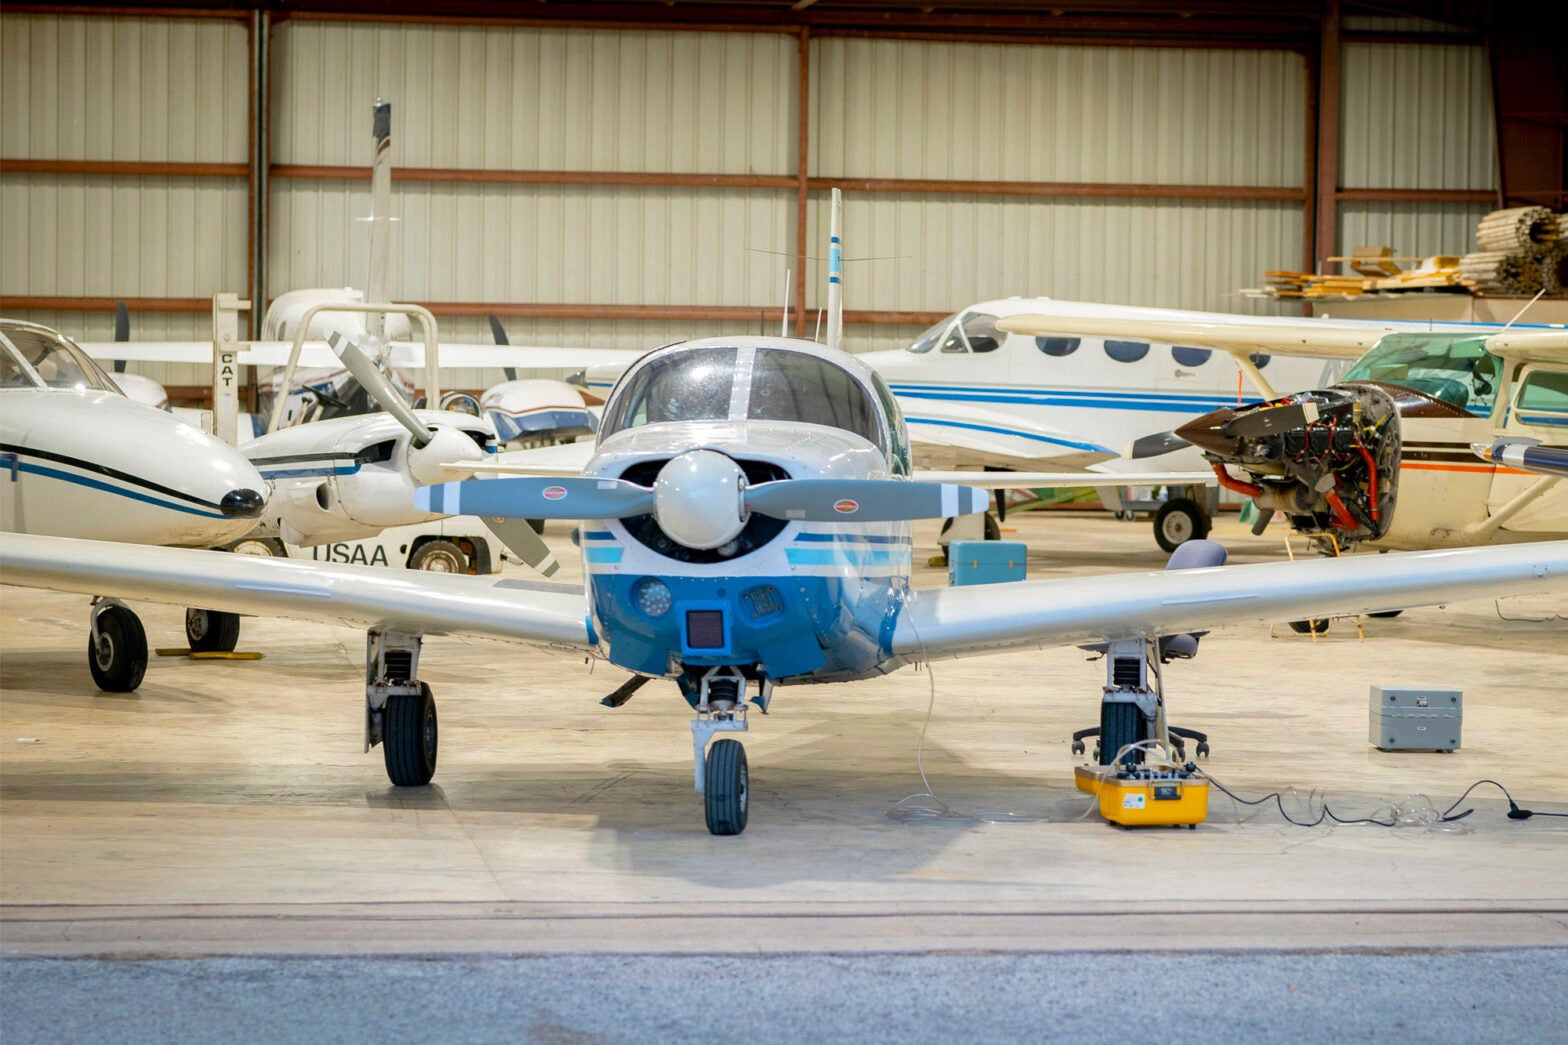 Kerrville Airport Sees New Growth with Business Aerospace Cluster